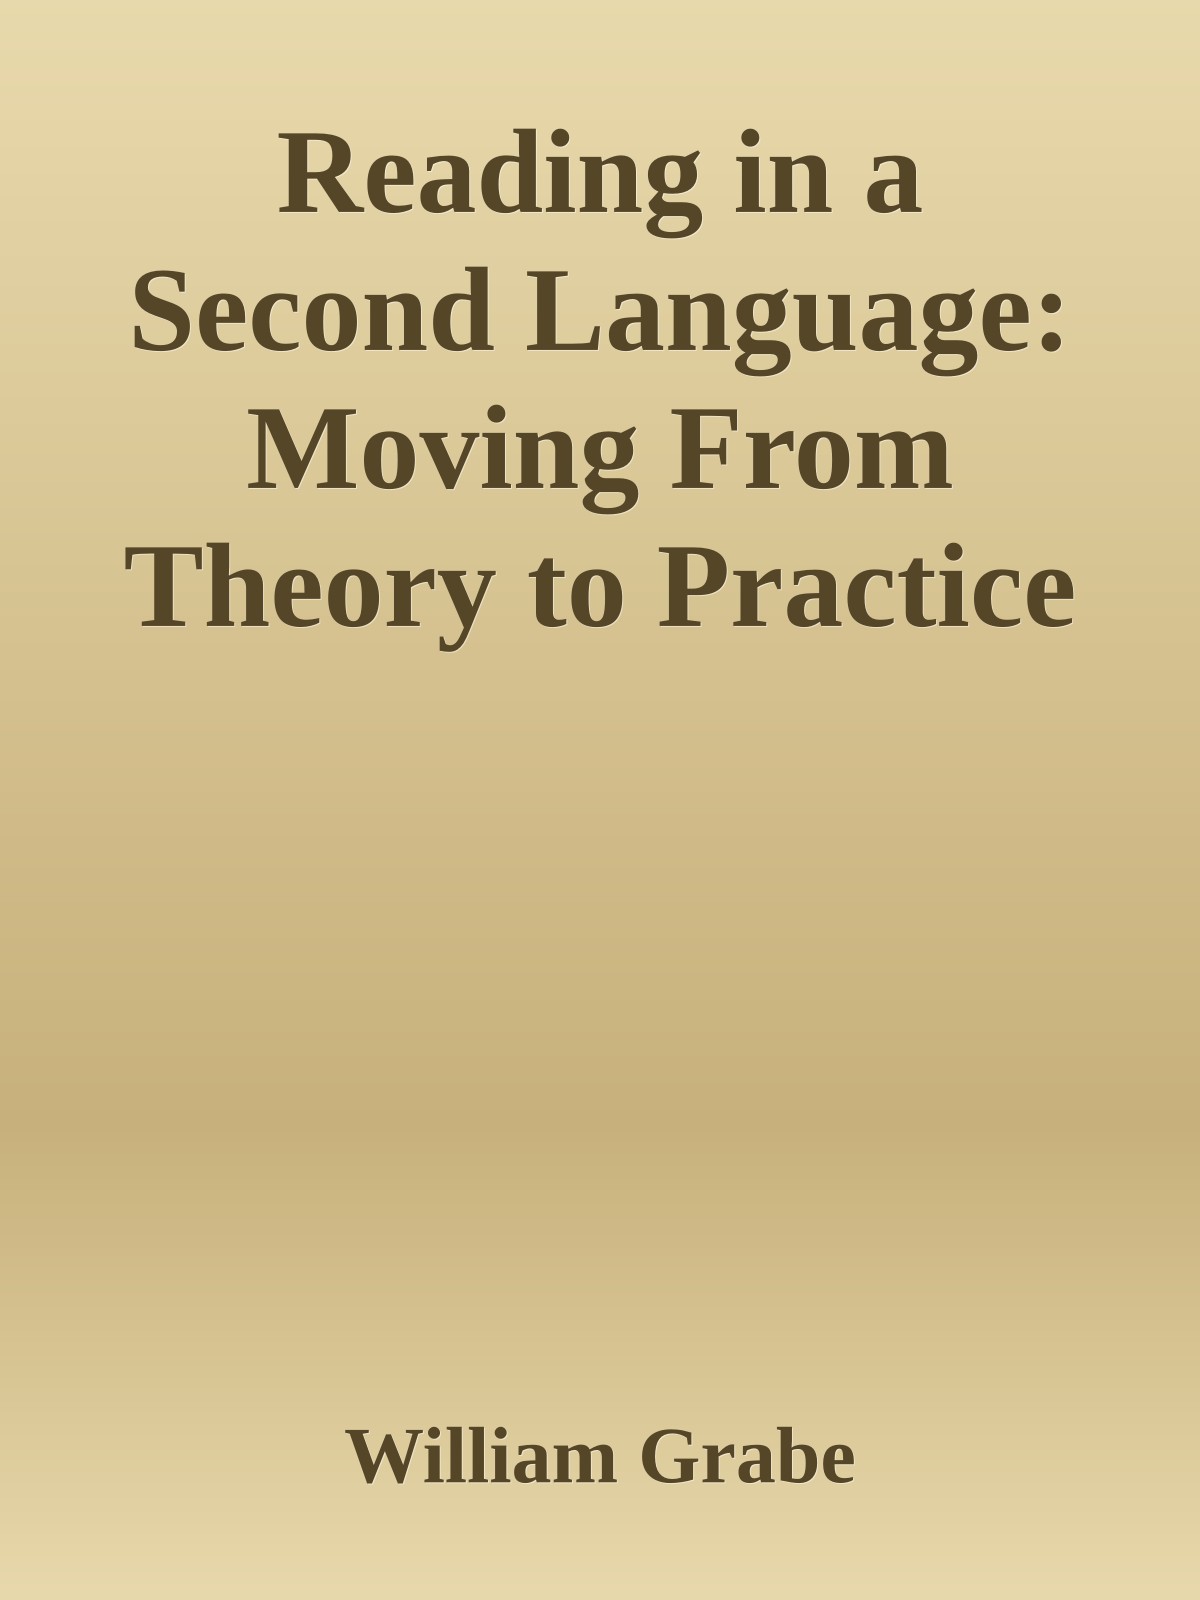 Reading in a Second Language: Moving From Theory to Practice